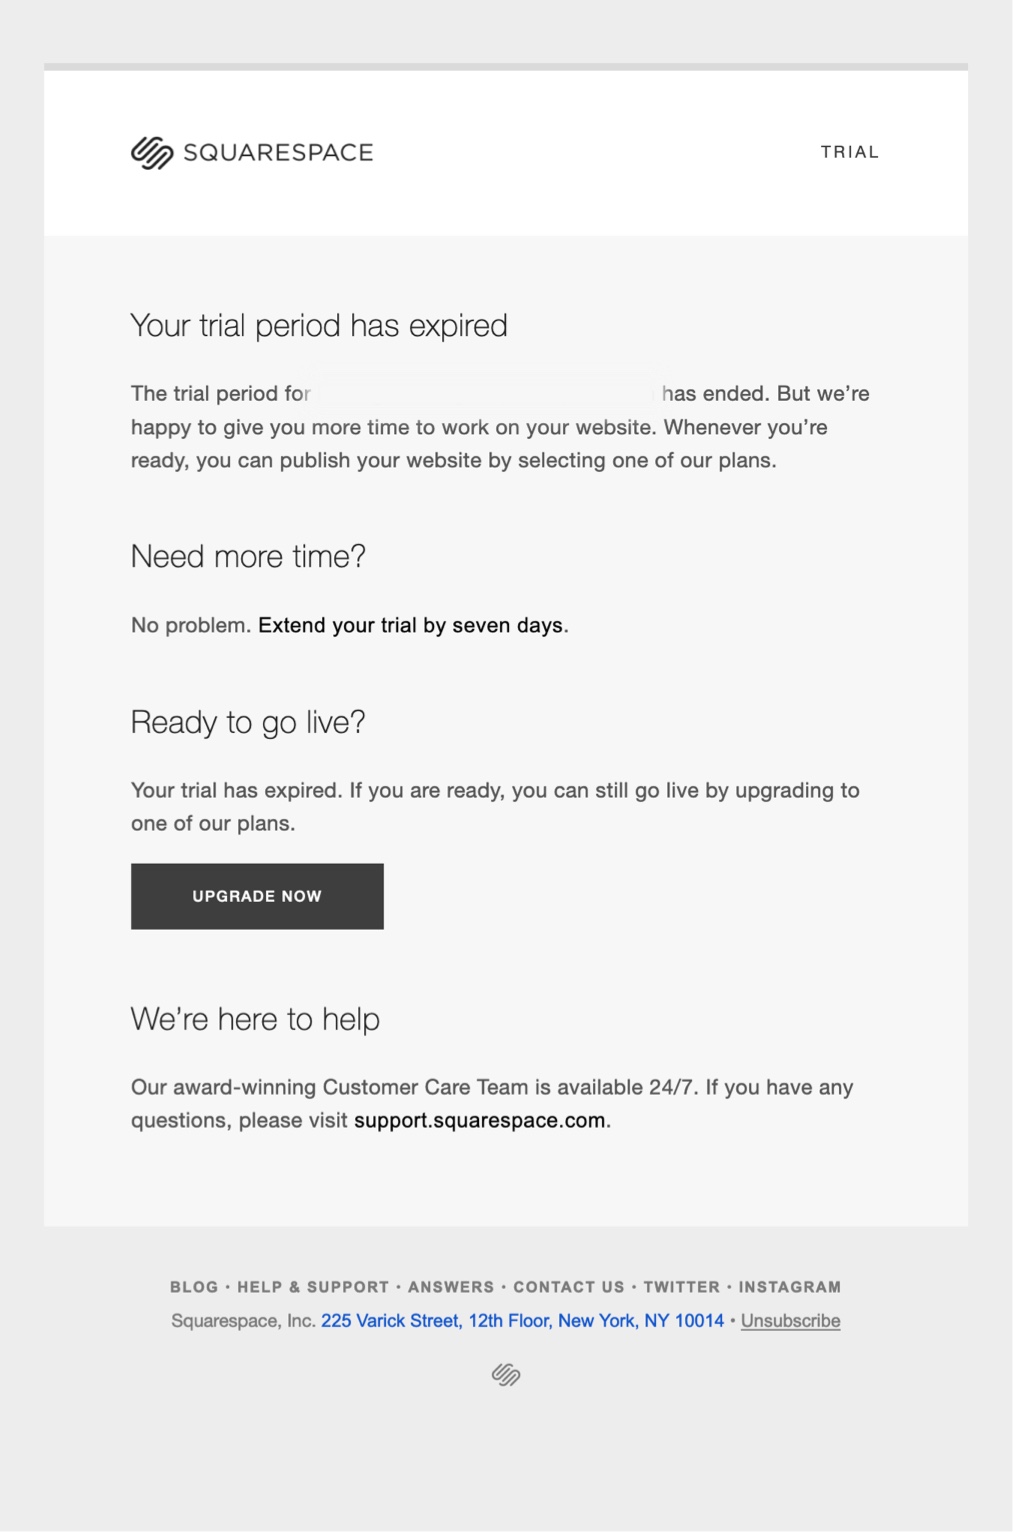 email-marketing-best-practices-squarespace